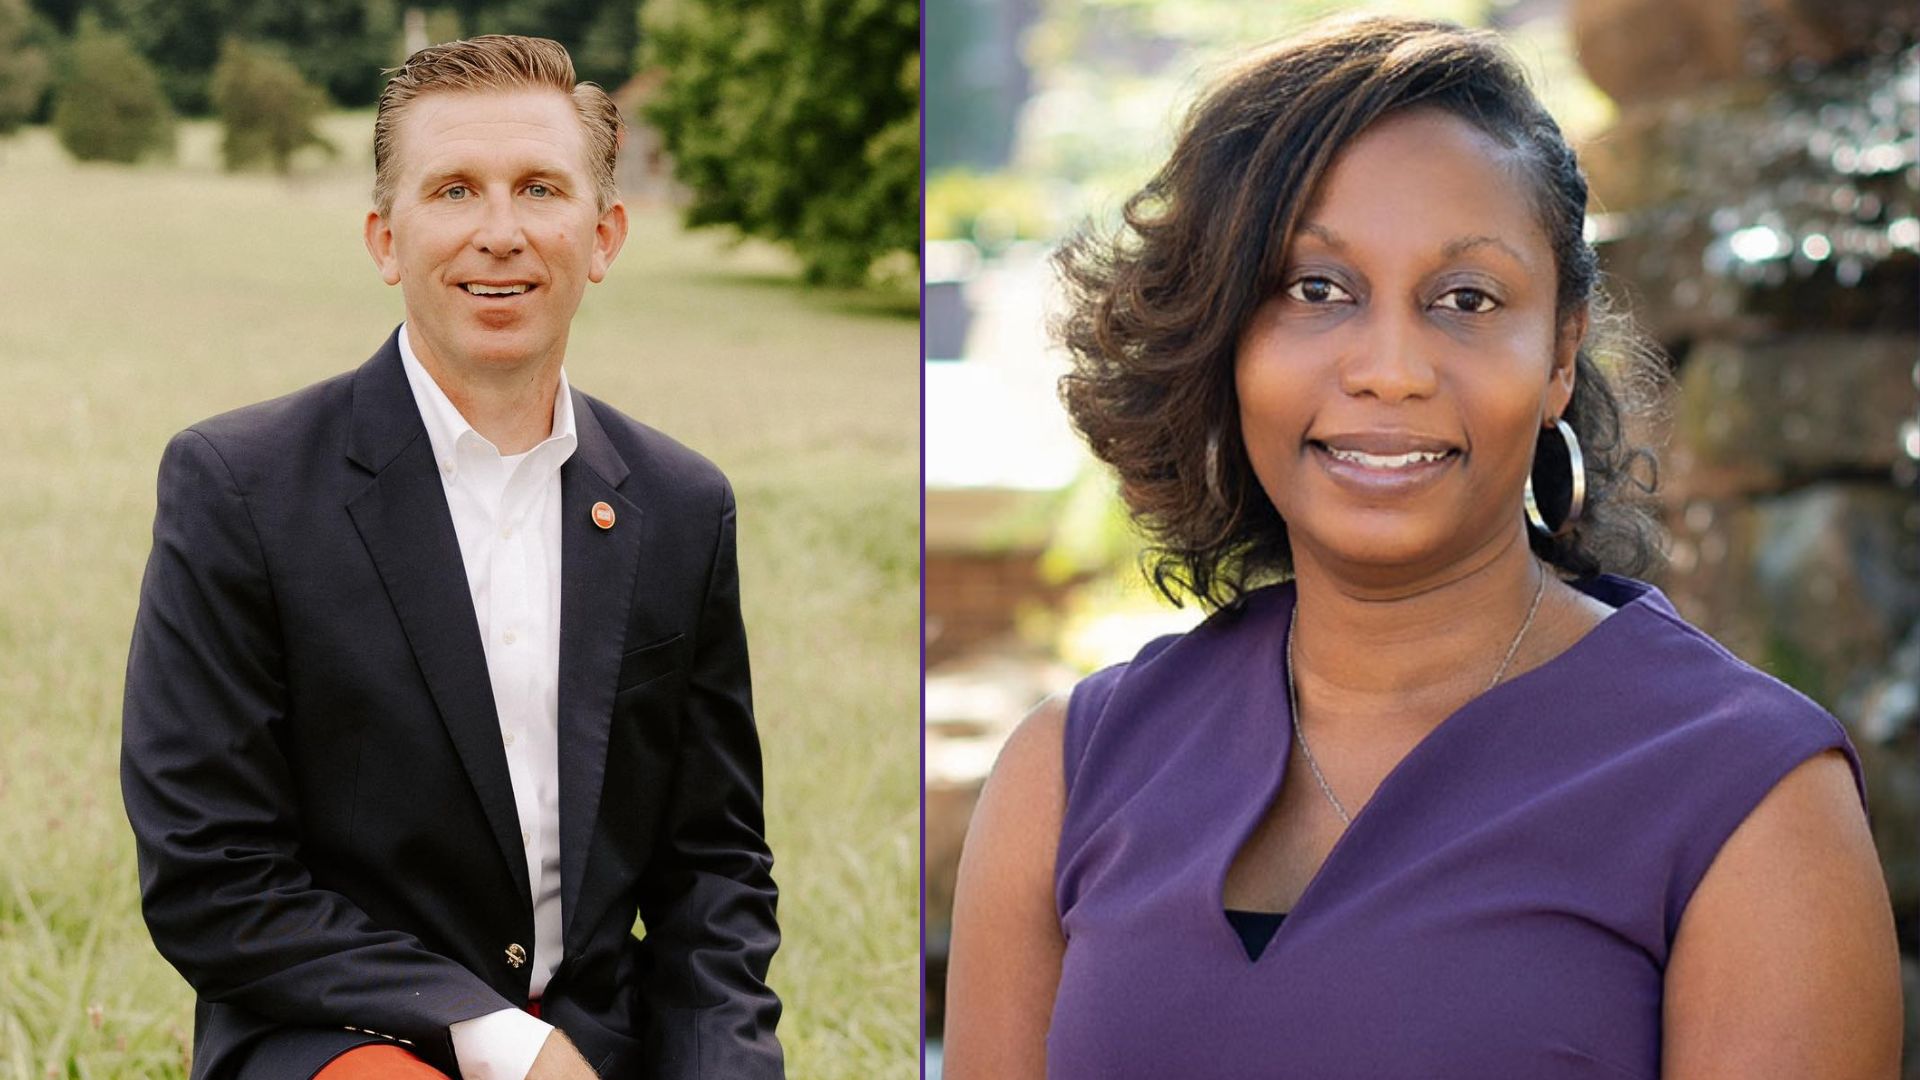 Rep. Ryan Williams and Charria Campbell